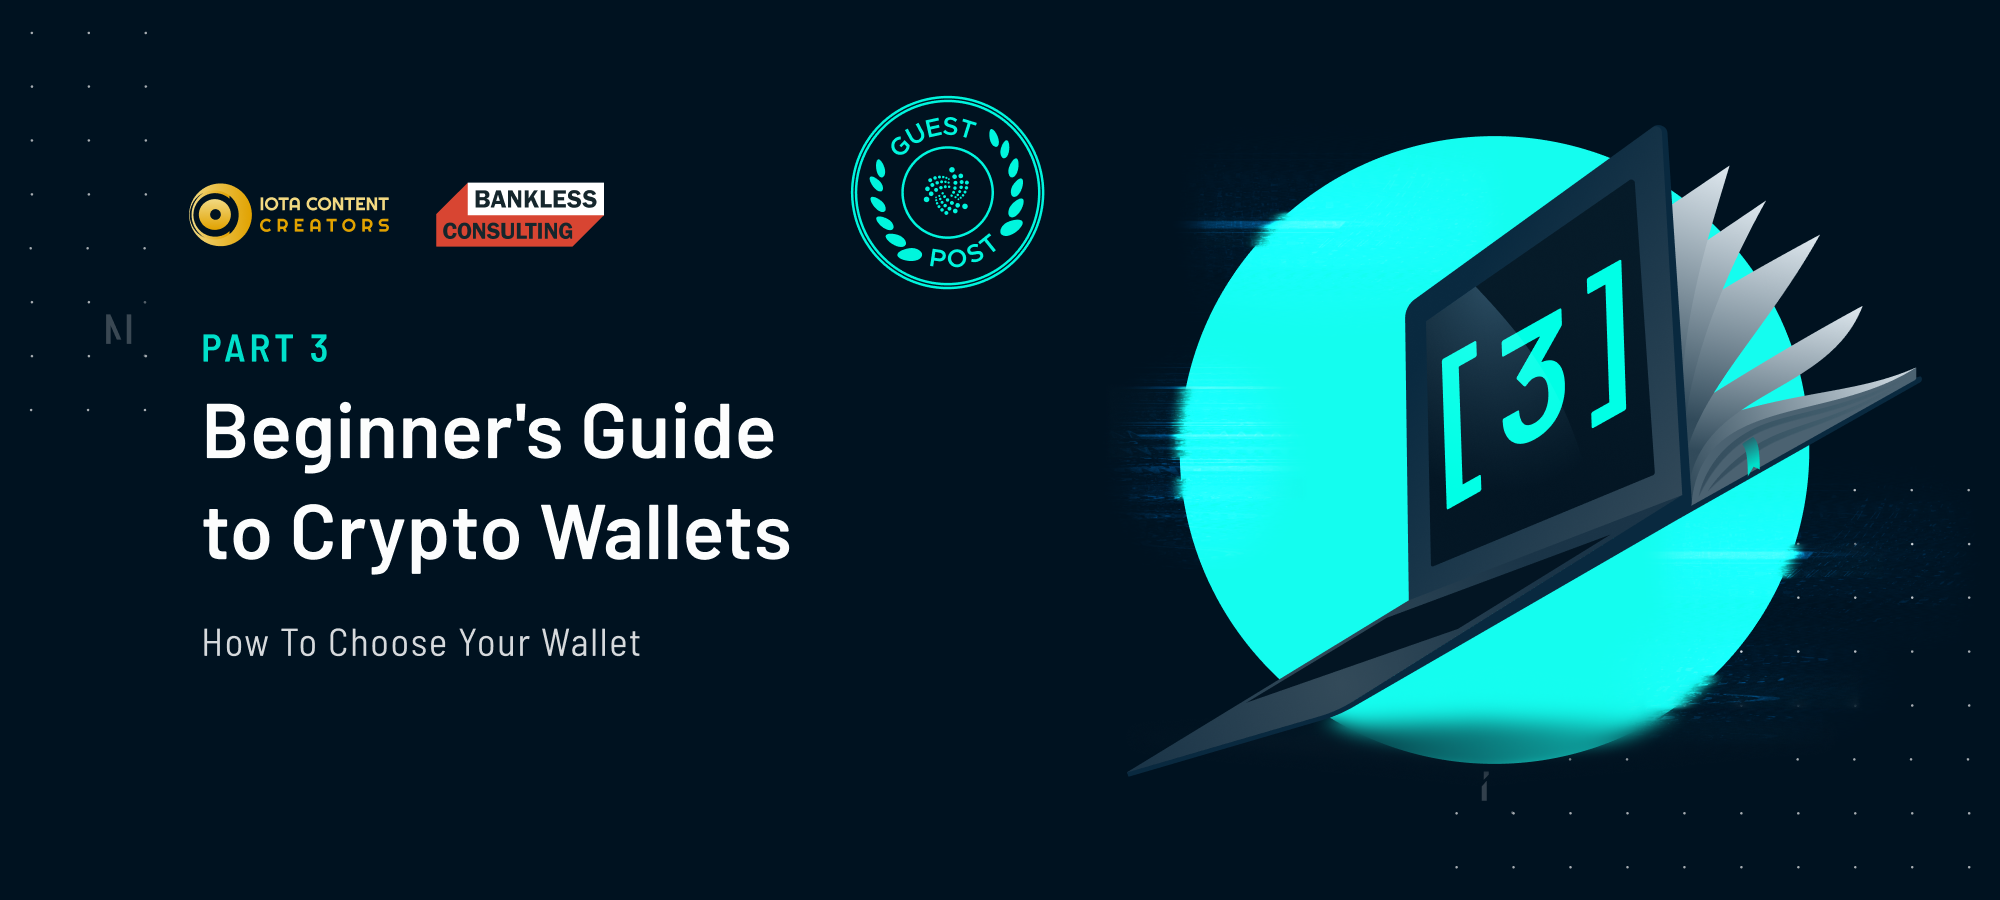 Beginner&apos;s Guide to Crypto Wallets: Part 3